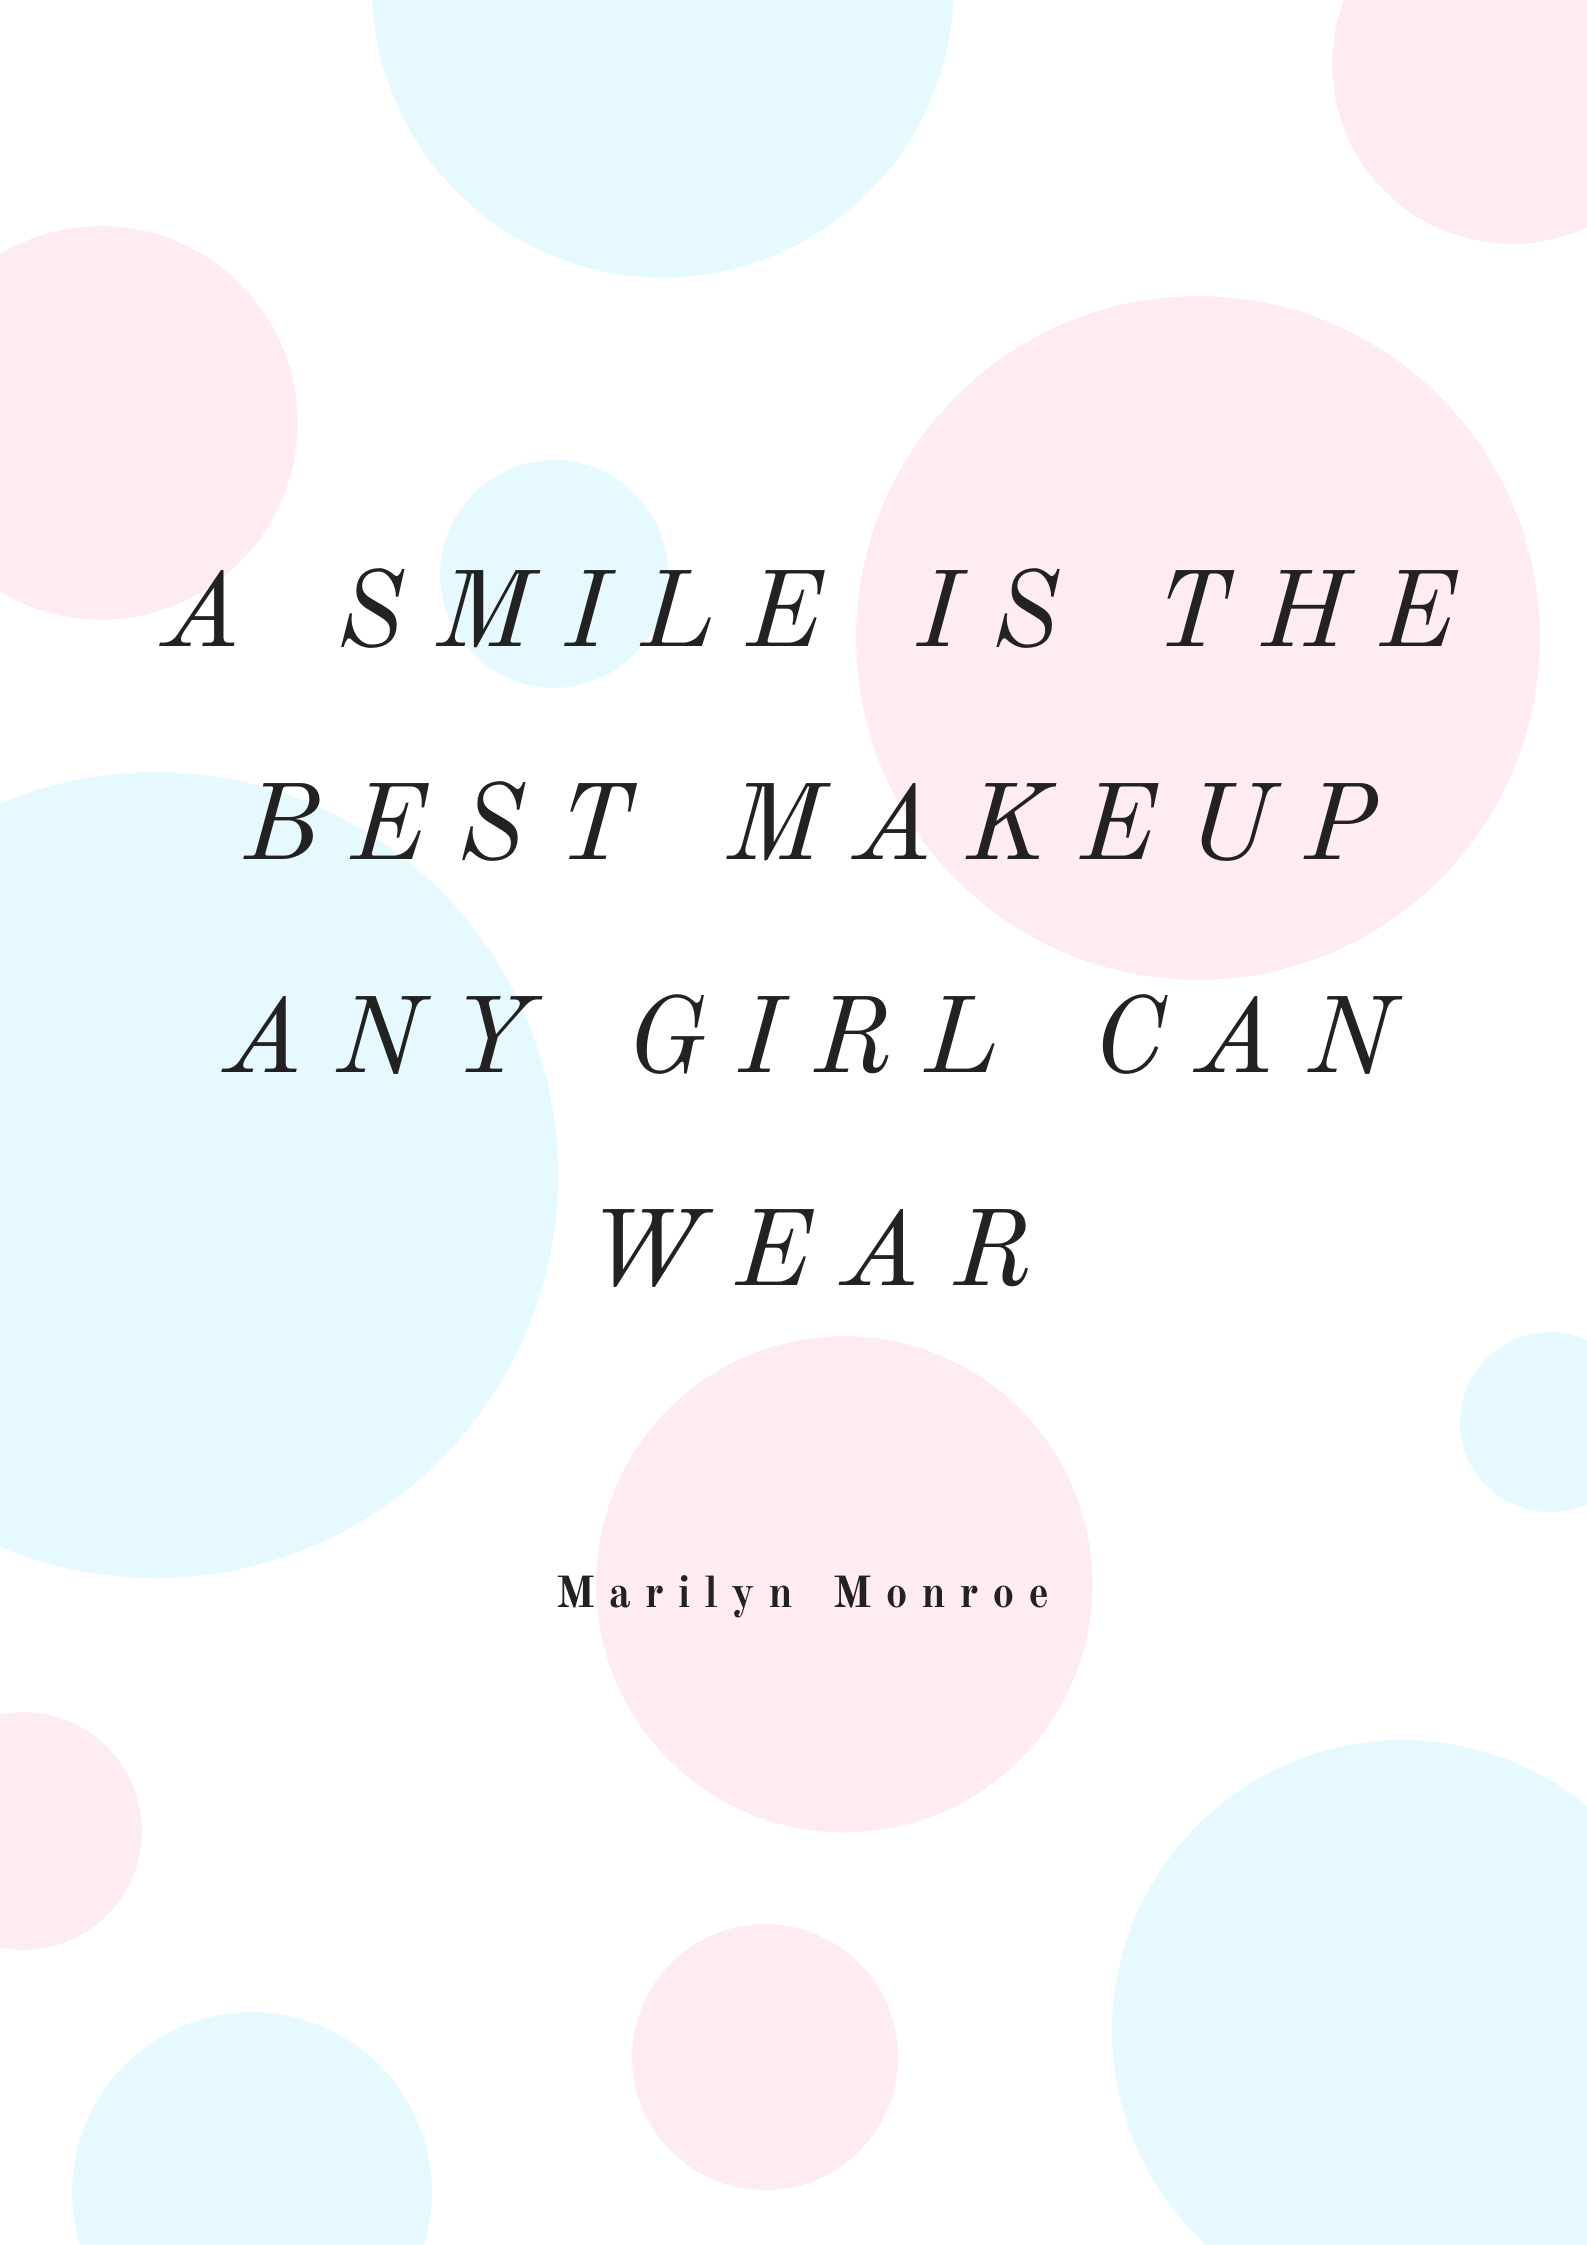 A smile is the best makeup any girl can wear - Marilyn Monroe